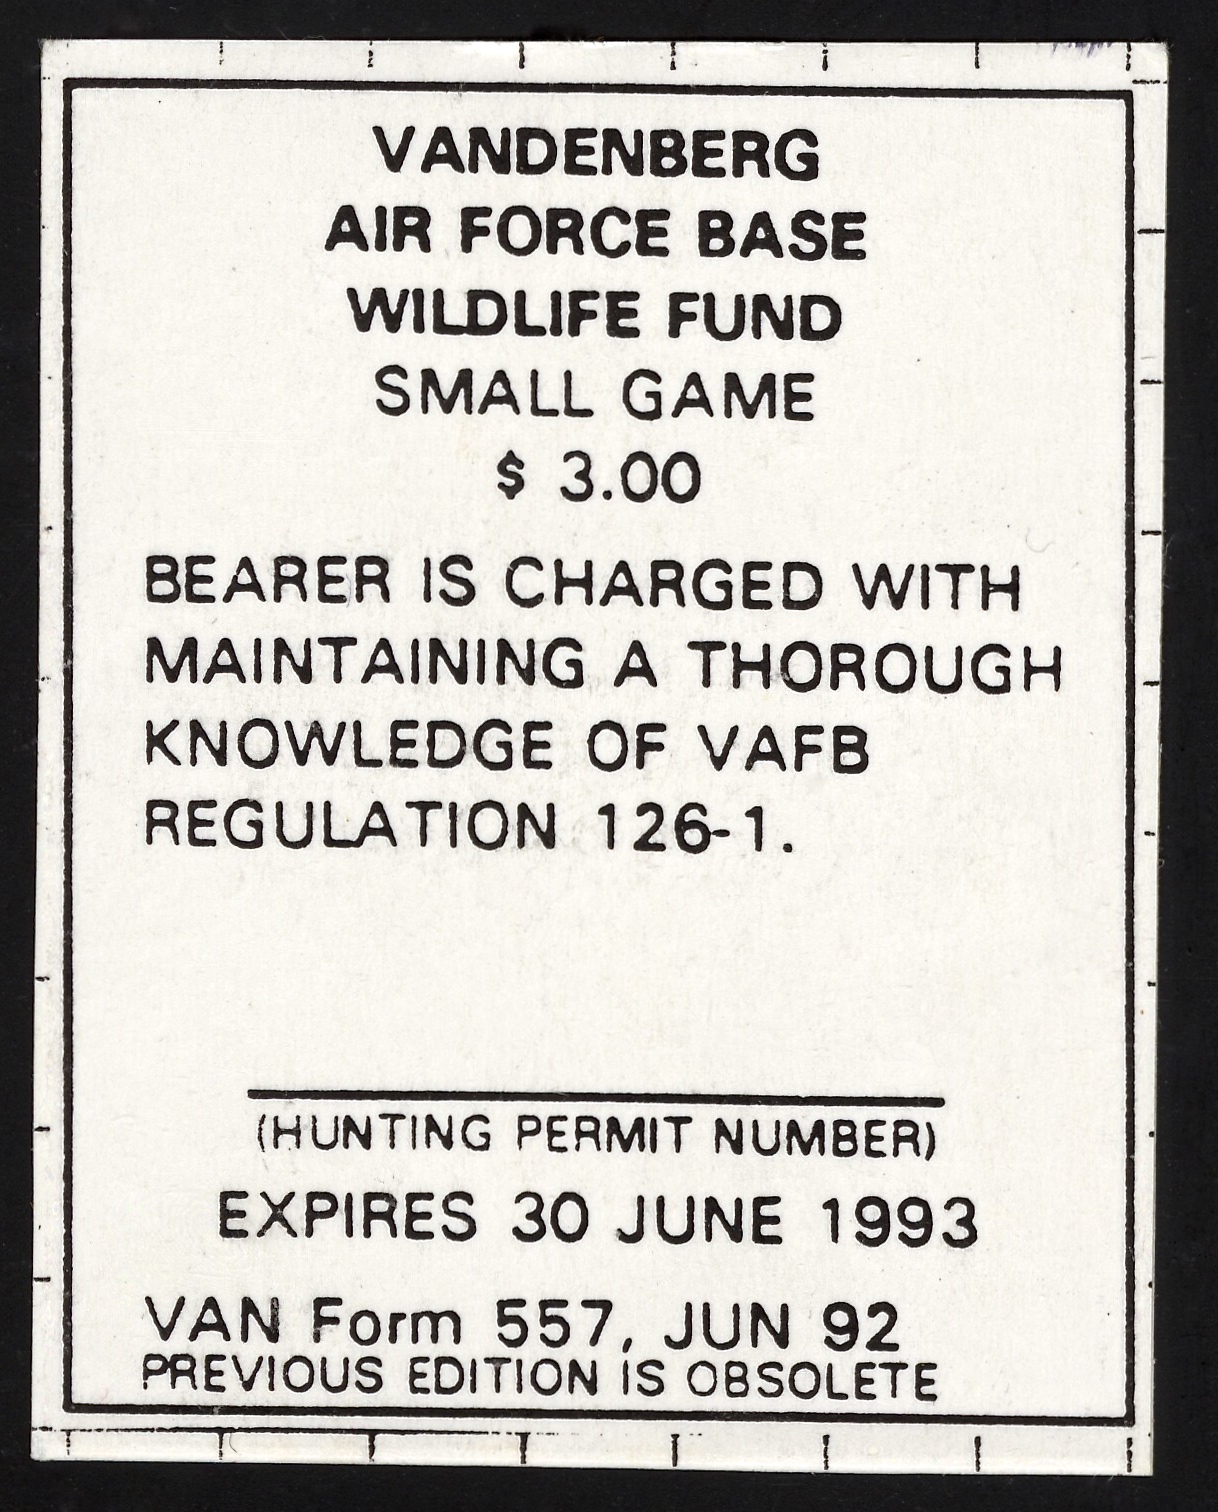 1992-93 VAFB Small Game